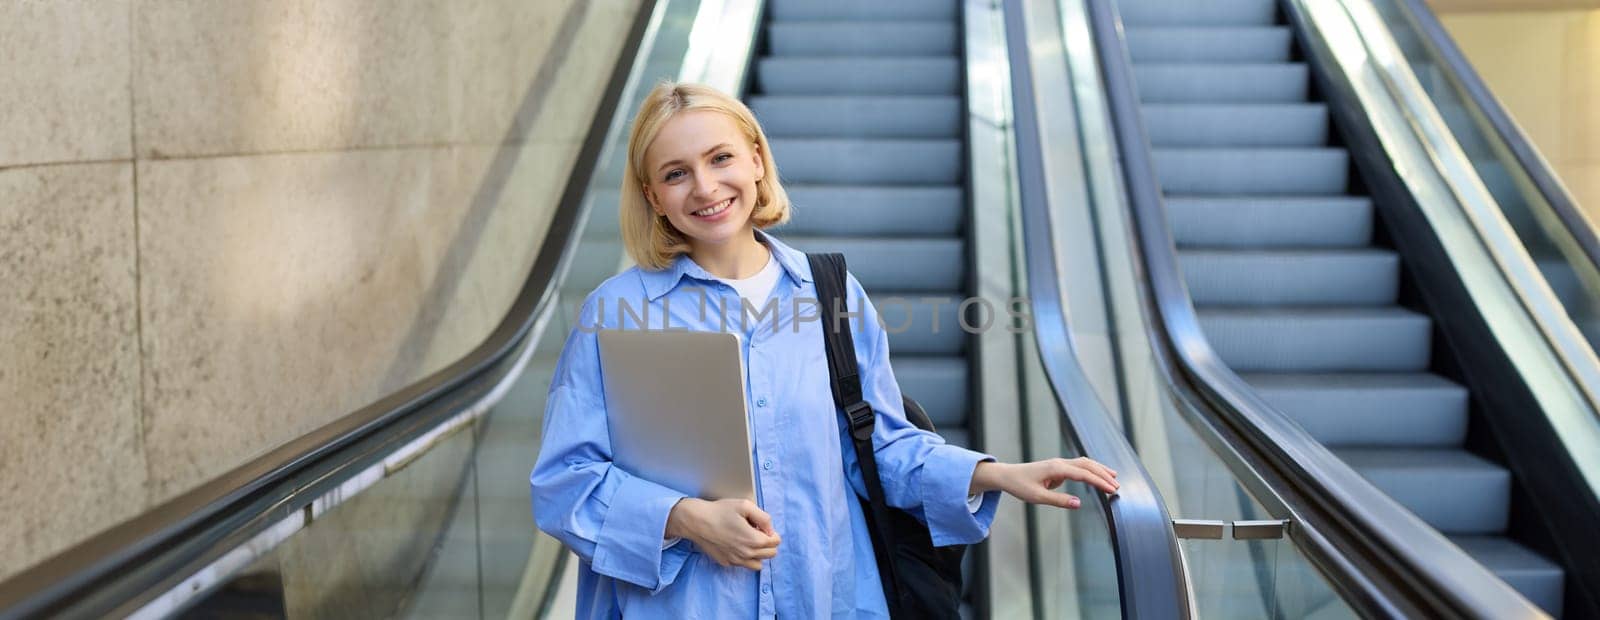 Portrait of smiling, beautiful blond girl, student with laptop and backpack, wearing blue shirt, using escalator, going down, looking confident at camera.